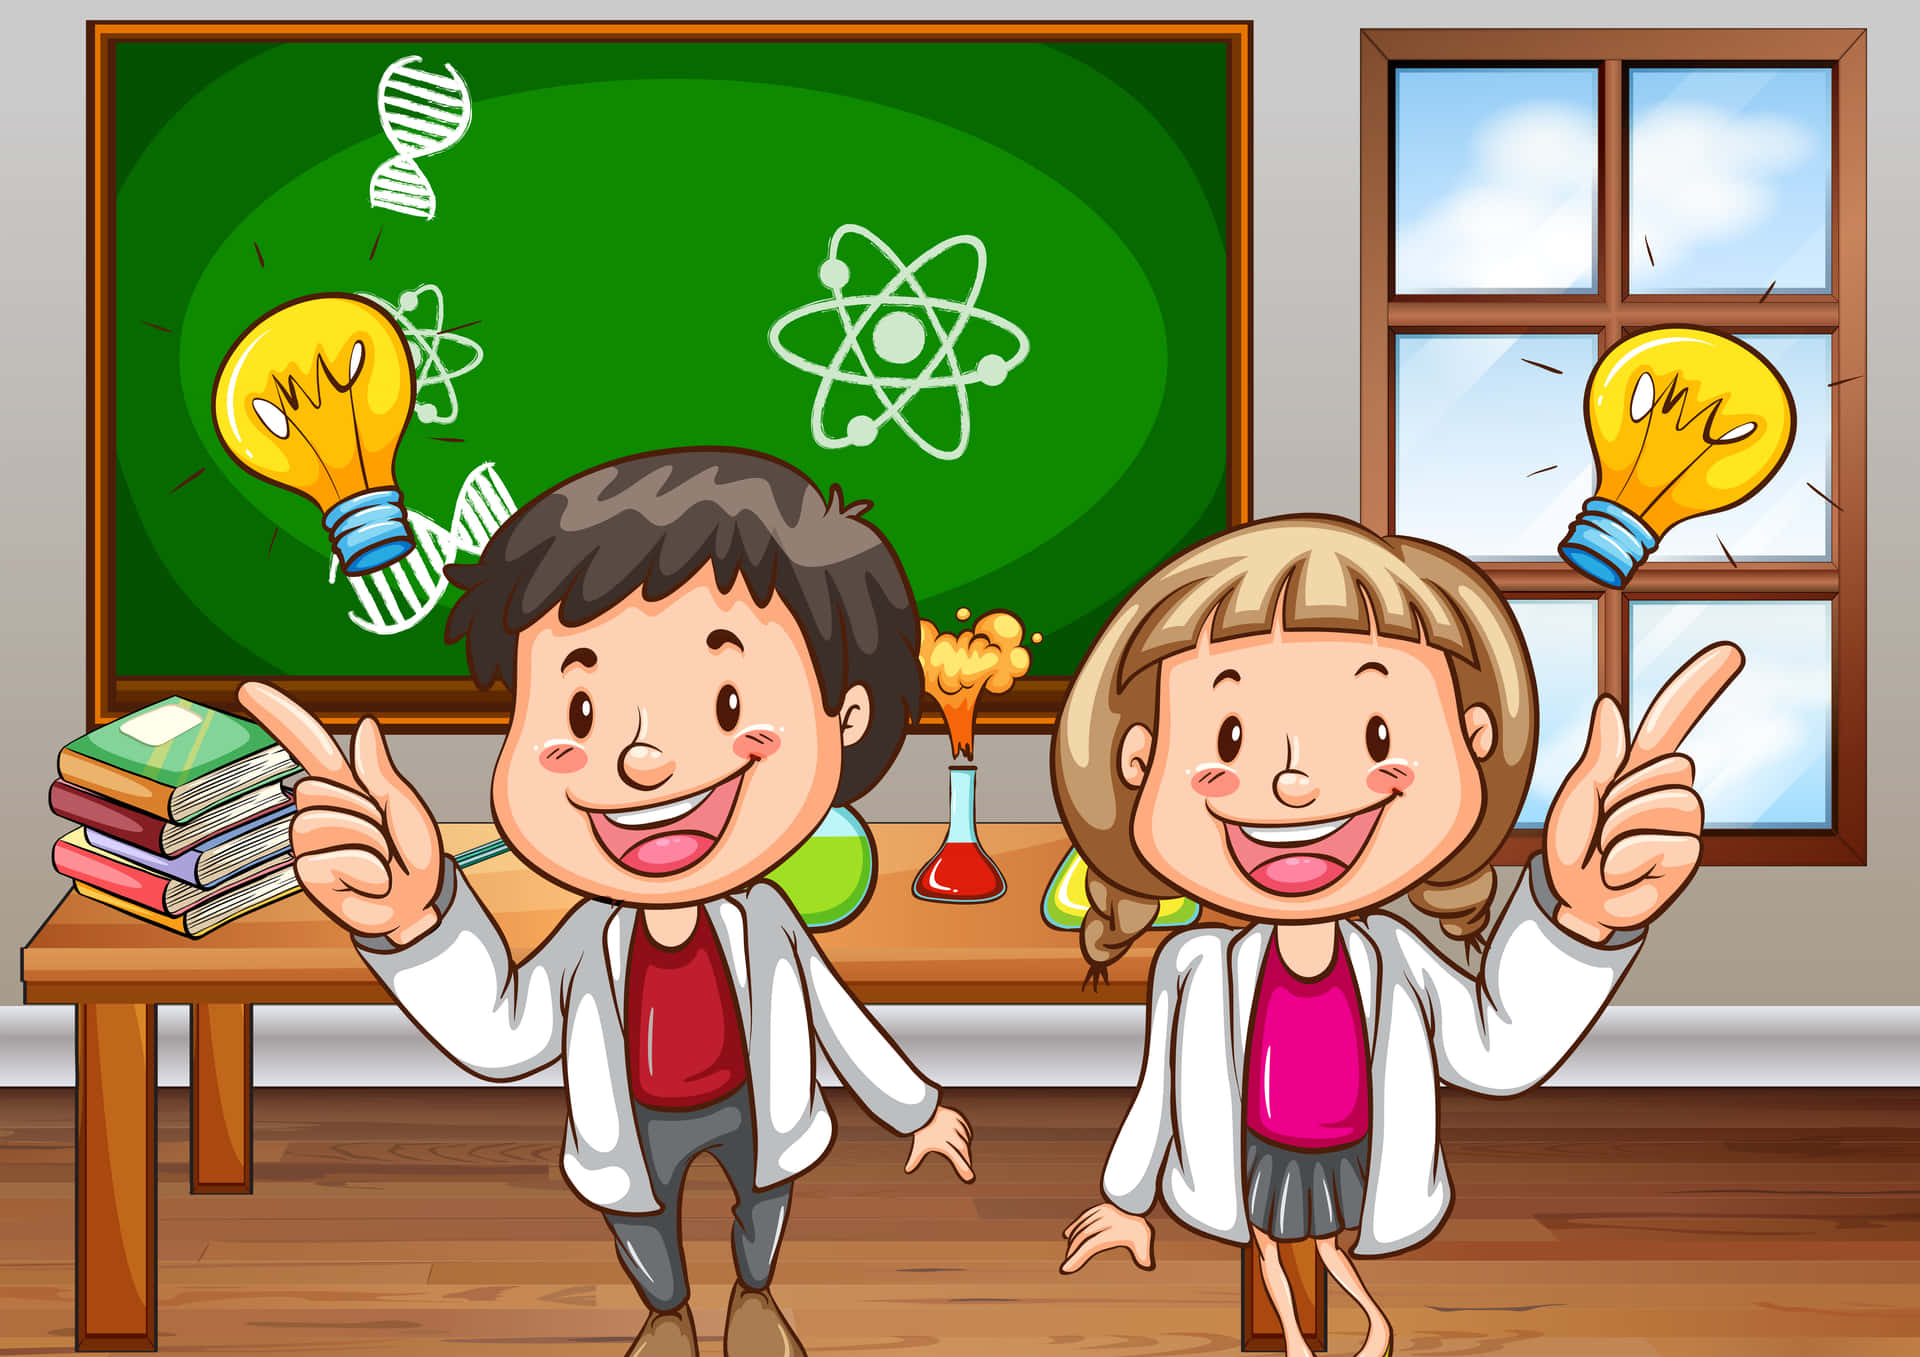 A creative and colorful illustration of cartoon characters conducting scientific experiments in a laboratory. Wallpaper